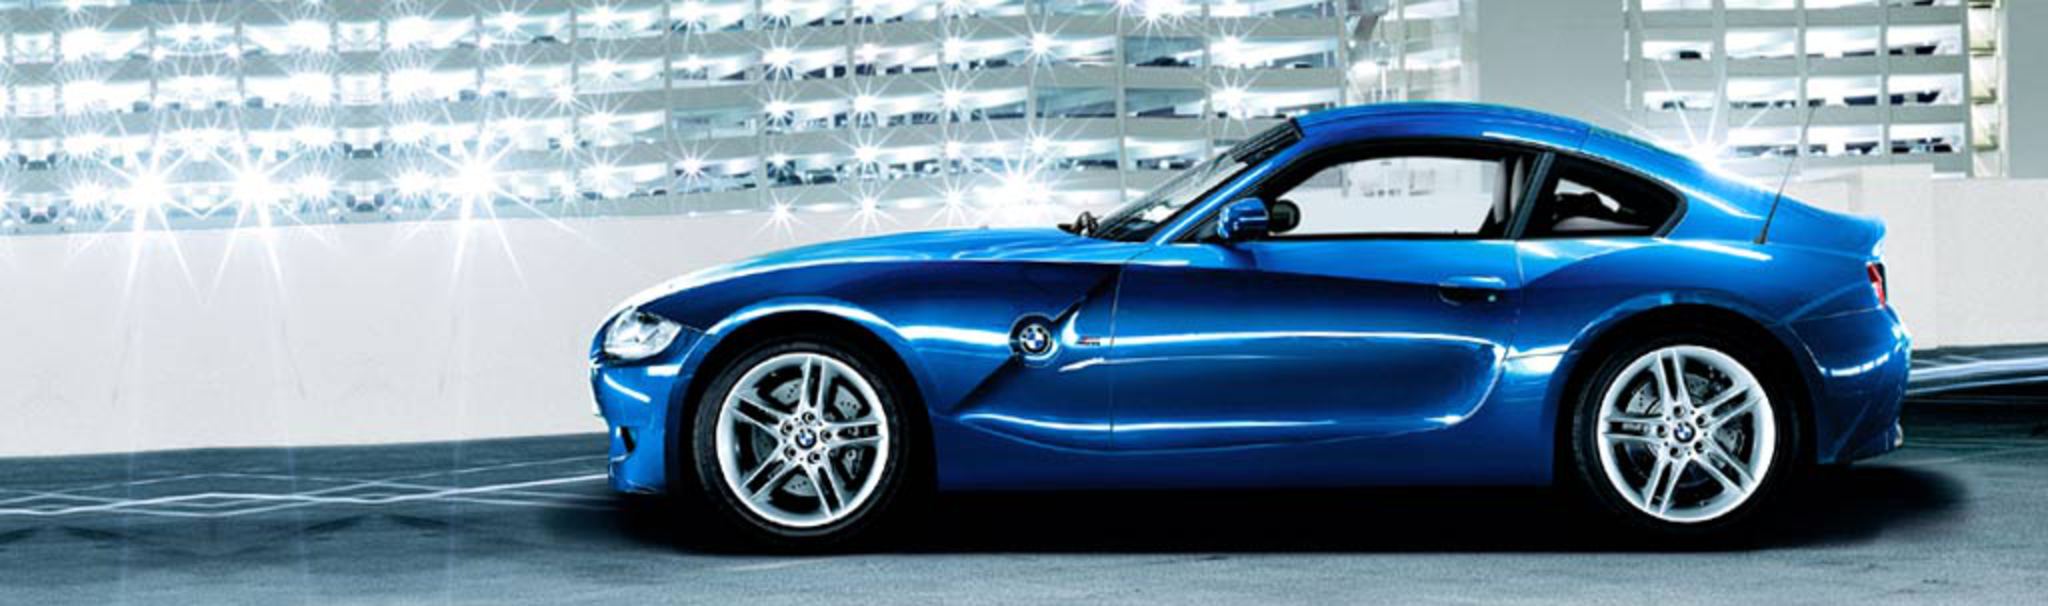 Expressive, defined and ahead of its time: the BMW Z4 CoupÃ© has successfully